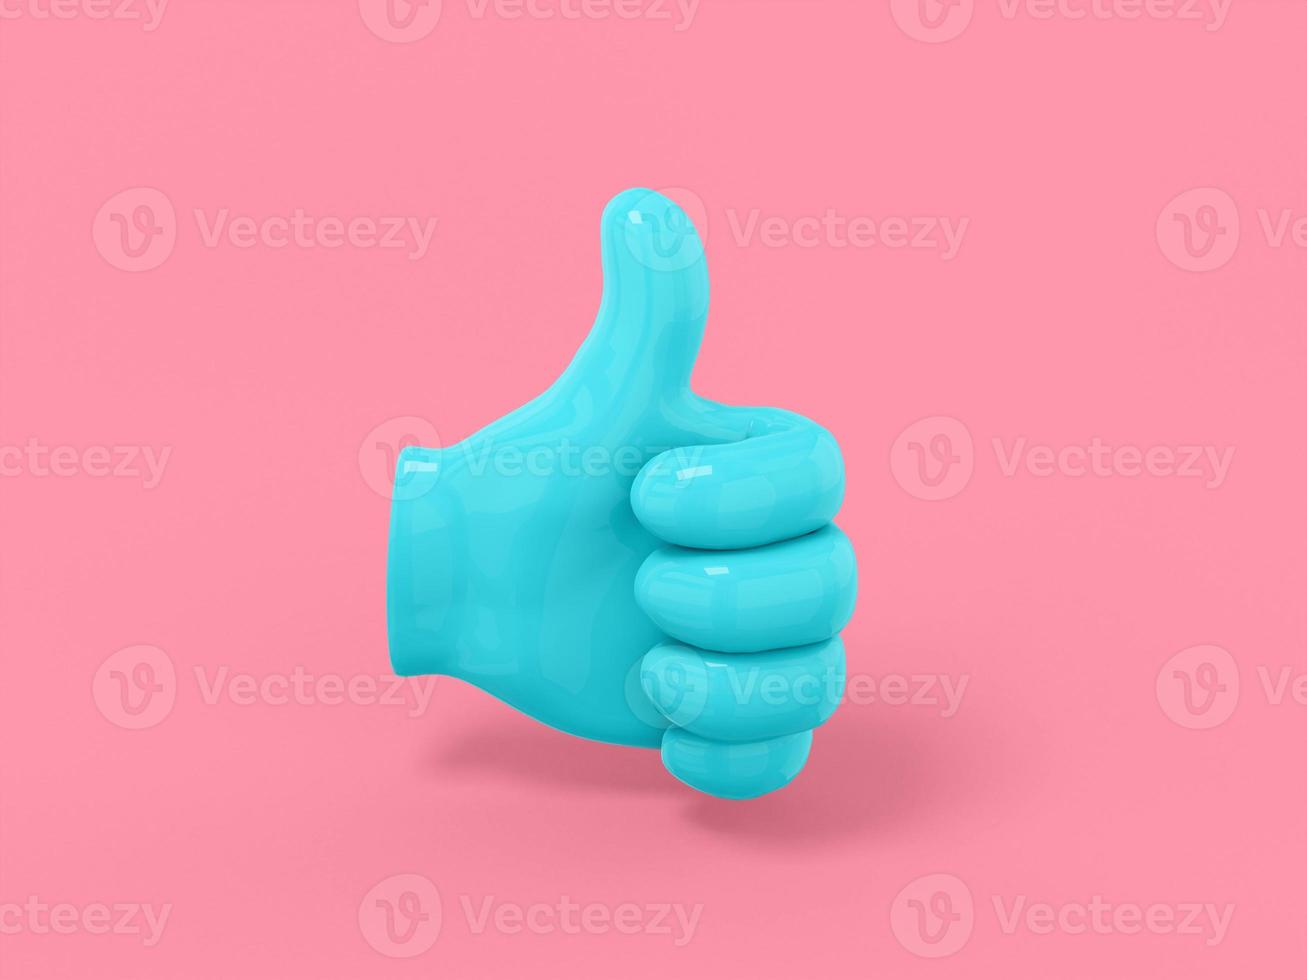 Blue one color palm with thumb up on pink flat background. Minimalistic design object. 3d rendering icon ui ux interface element. photo